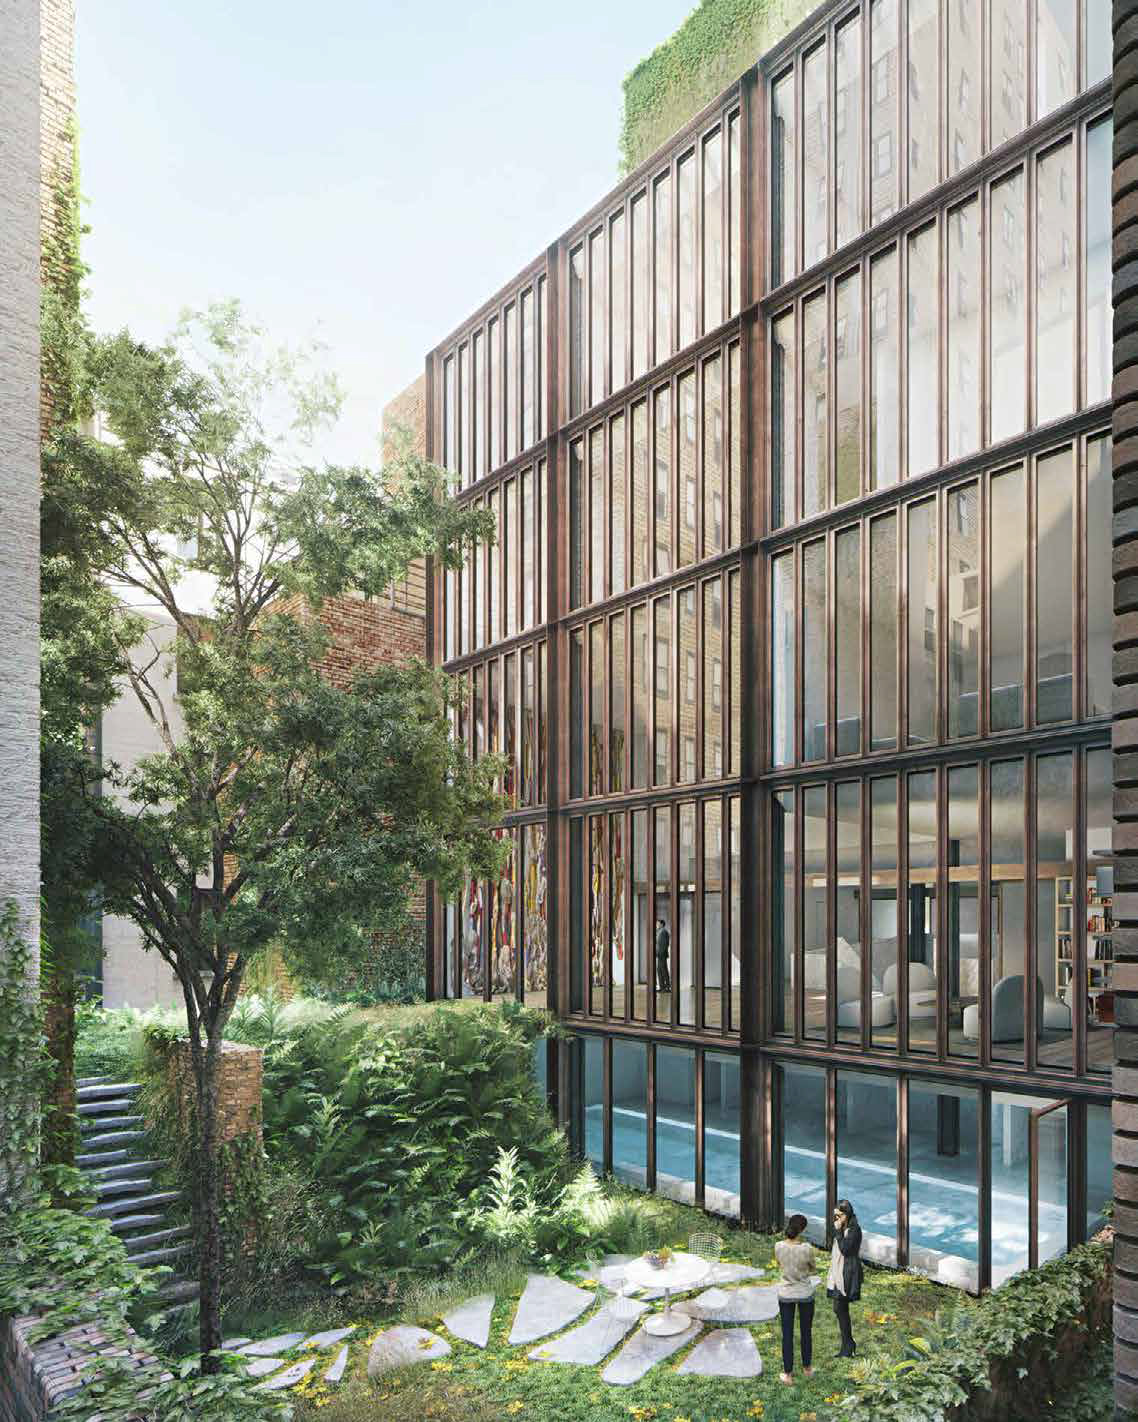 Proposal for the rear of 11-15 East 75th Street